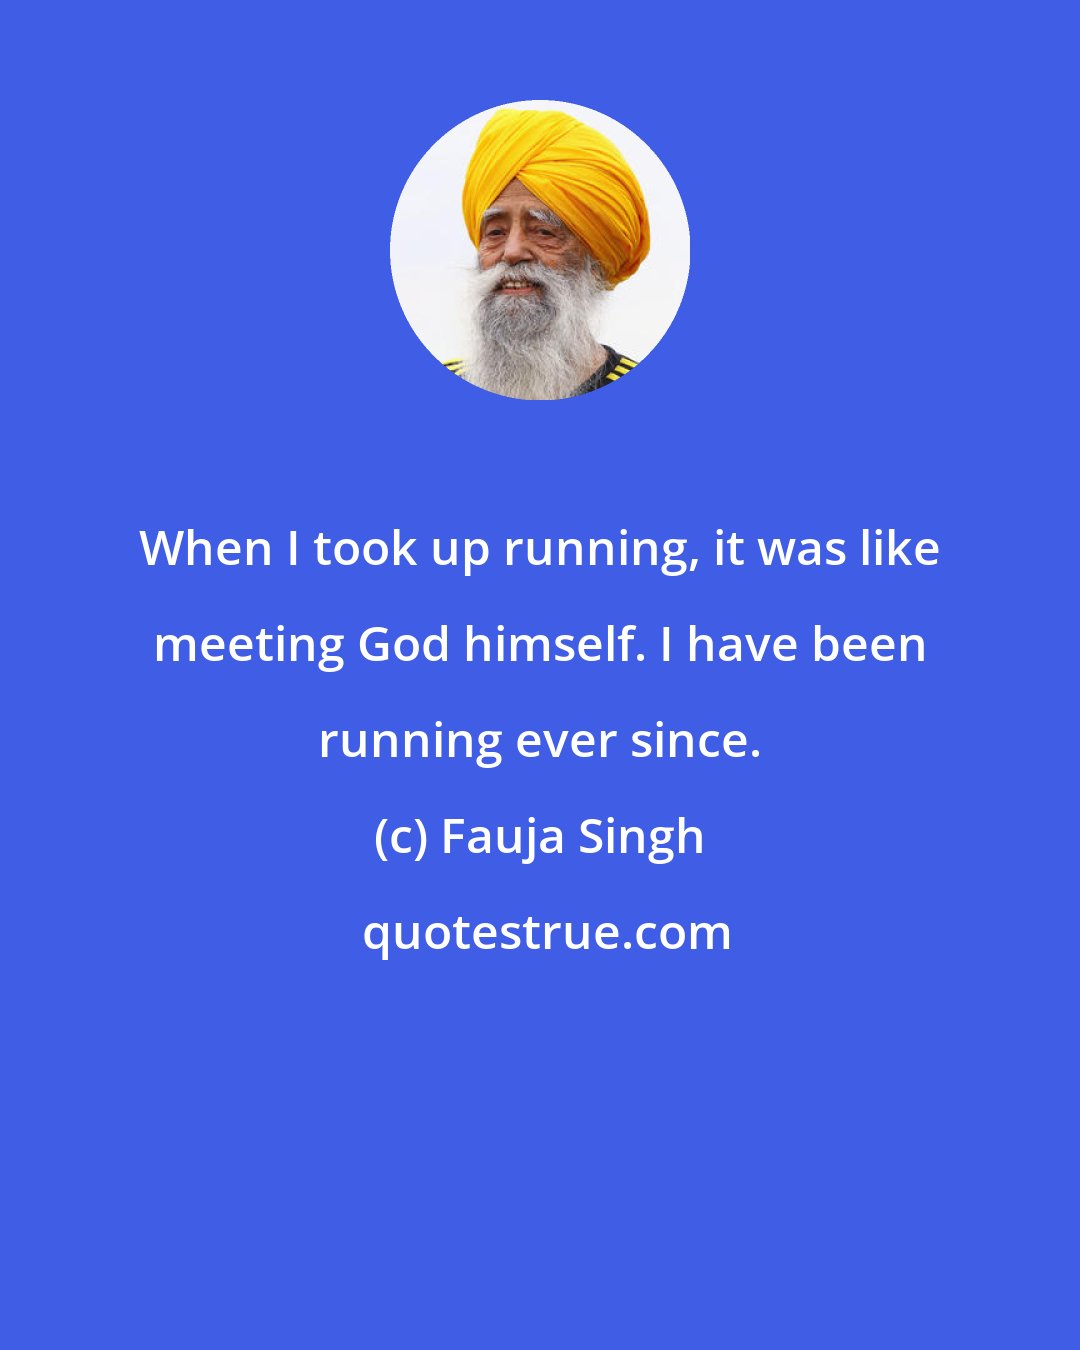 Fauja Singh: When I took up running, it was like meeting God himself. I have been running ever since.